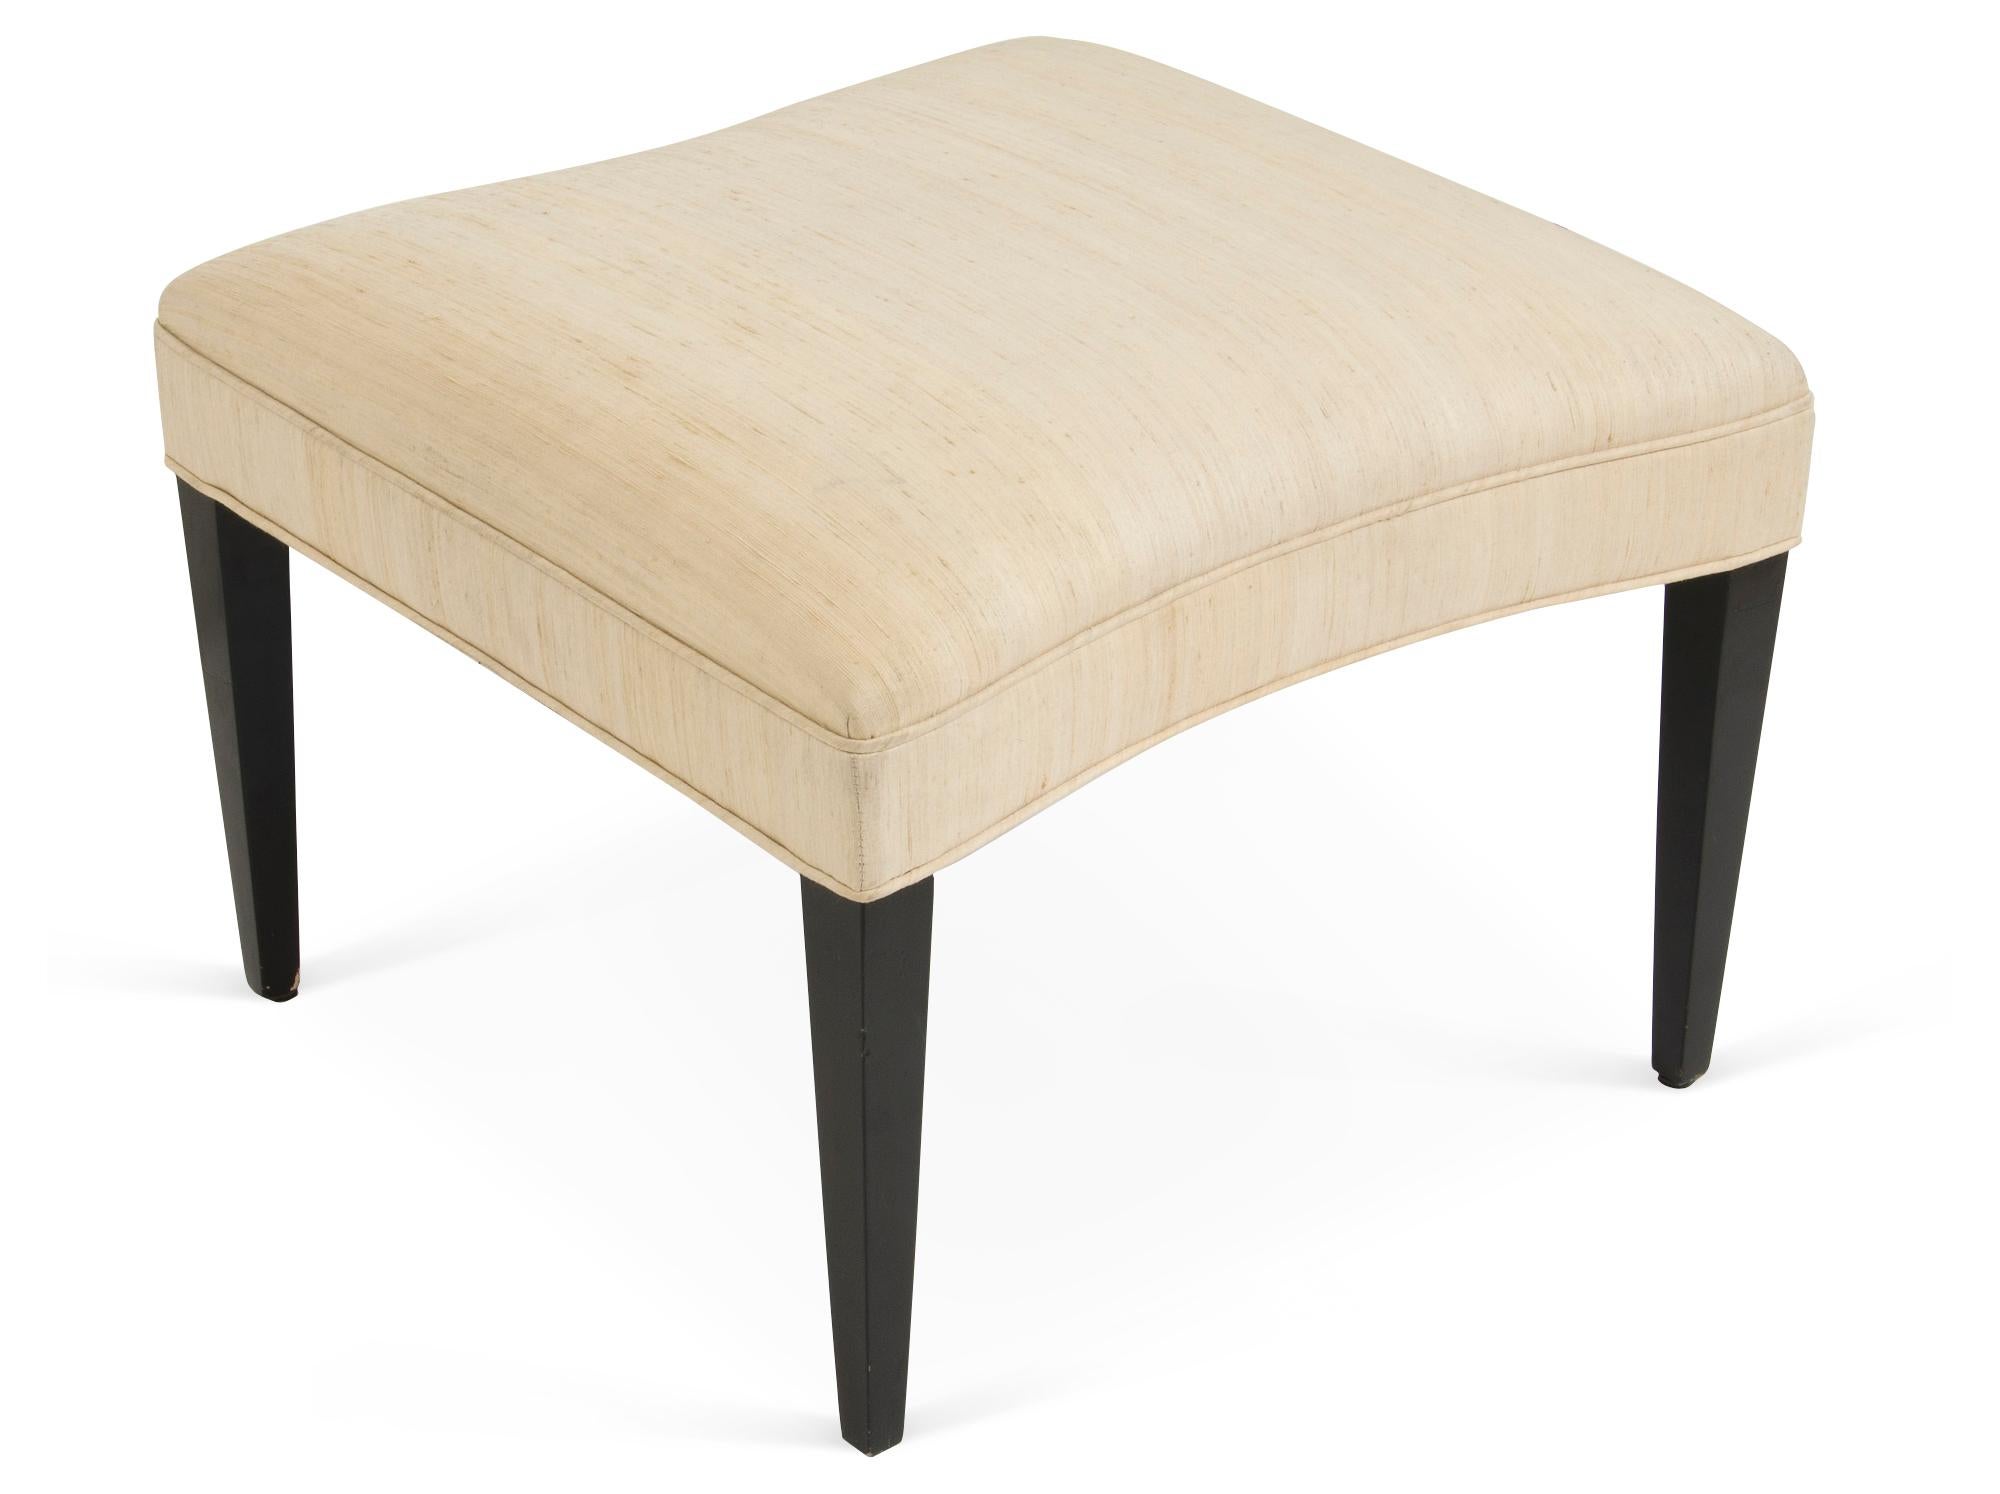 The handcrafted upholstered ottoman is built with tapered legs and convex sides to fit snugly within the matching cove chairs. Frame in alder or Walnut wood. Each piece is stamped.. Custom sizes and finishes available.
 